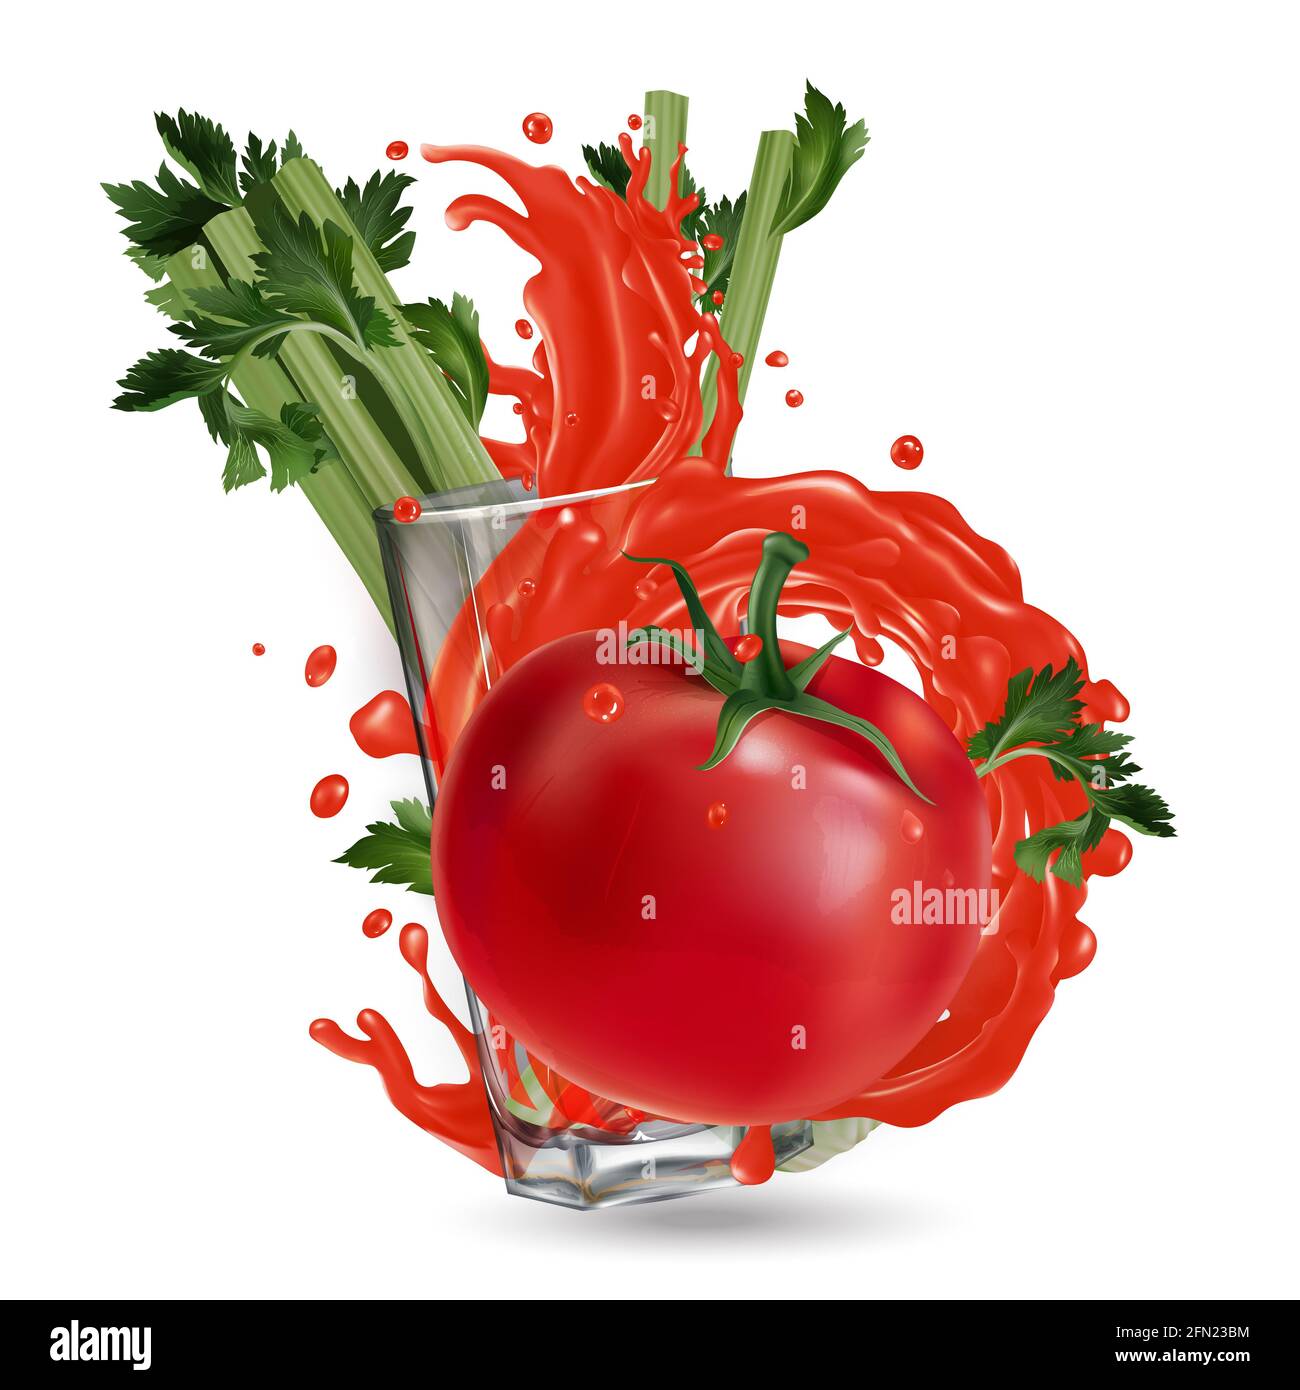 Tomato, celery and a glass with a splash of vegetable juice. Stock Photo